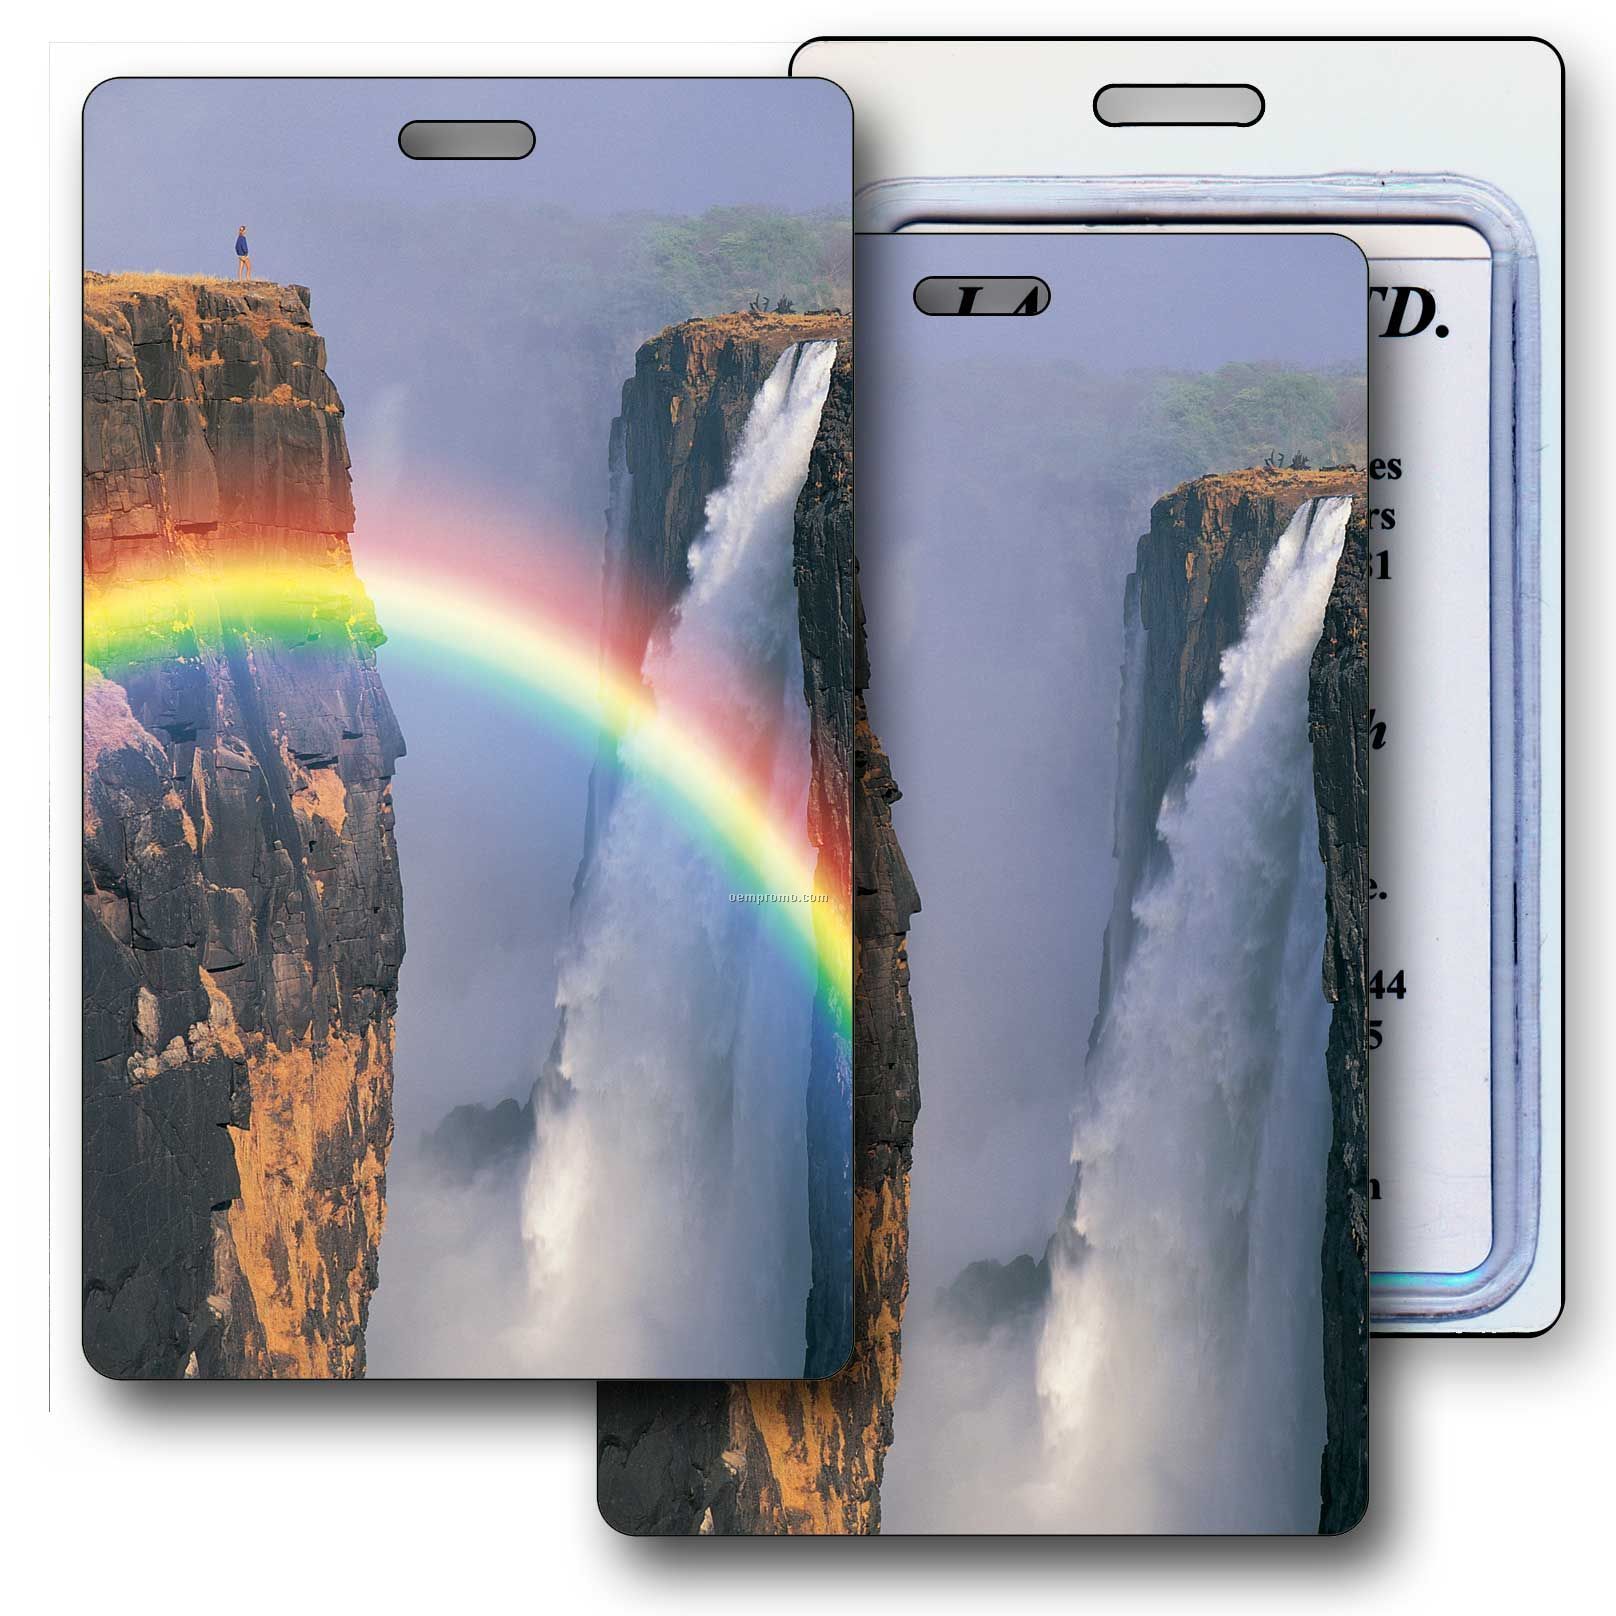 Luggage Tag 3d Lenticular Waterfalls, Rainbow, Stock Image (Blank Product)